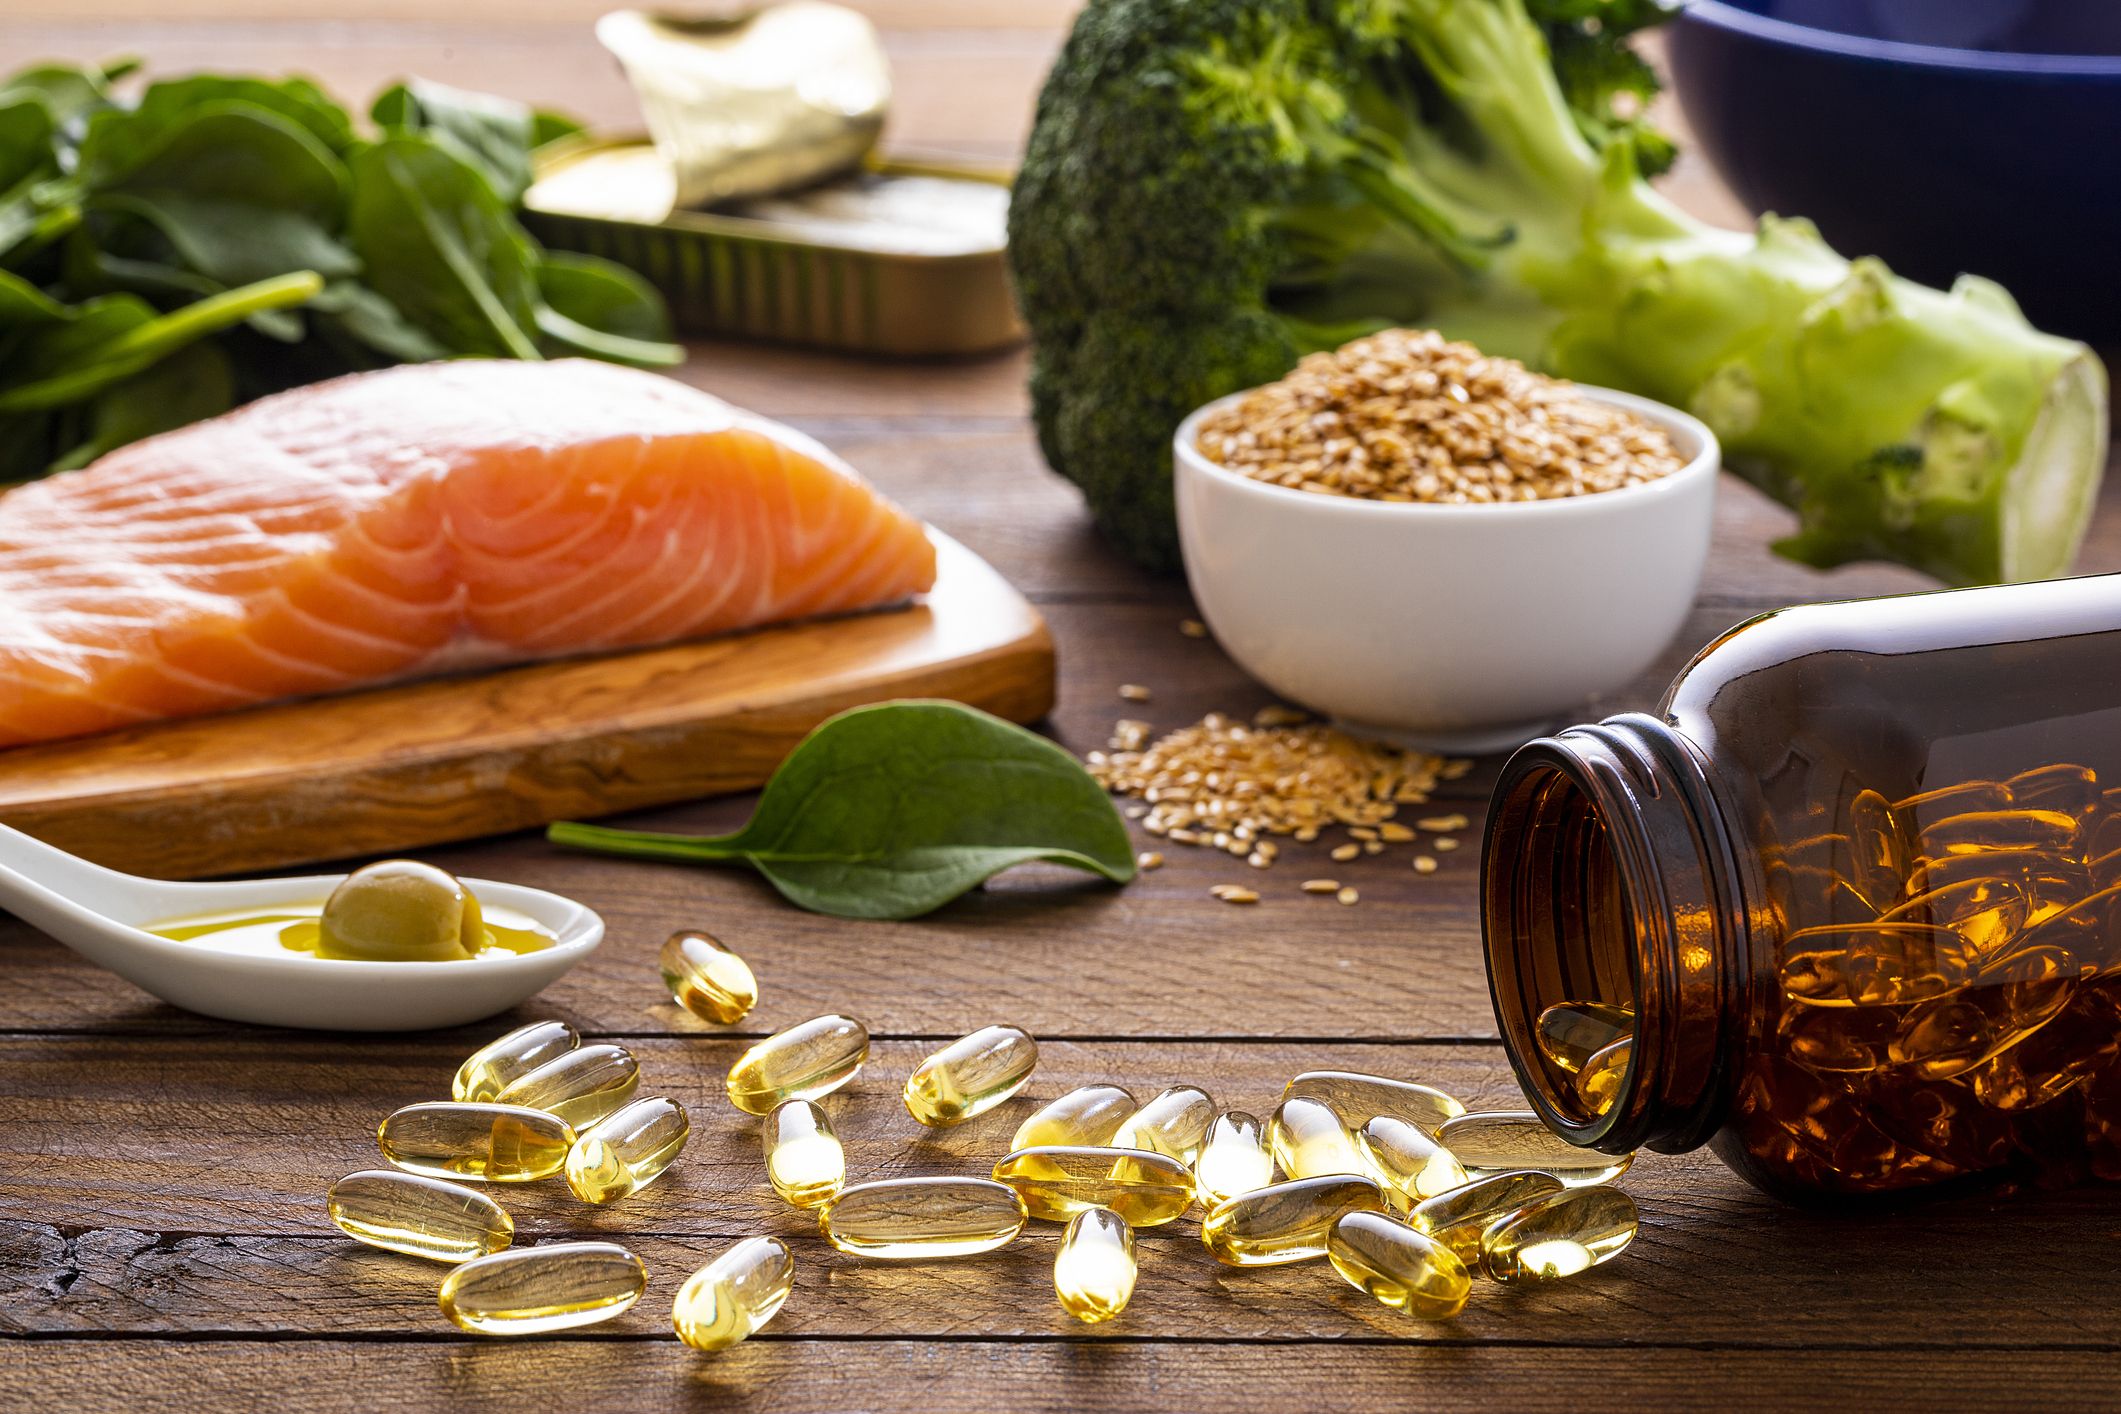 What are Omega-3 fatty acids?